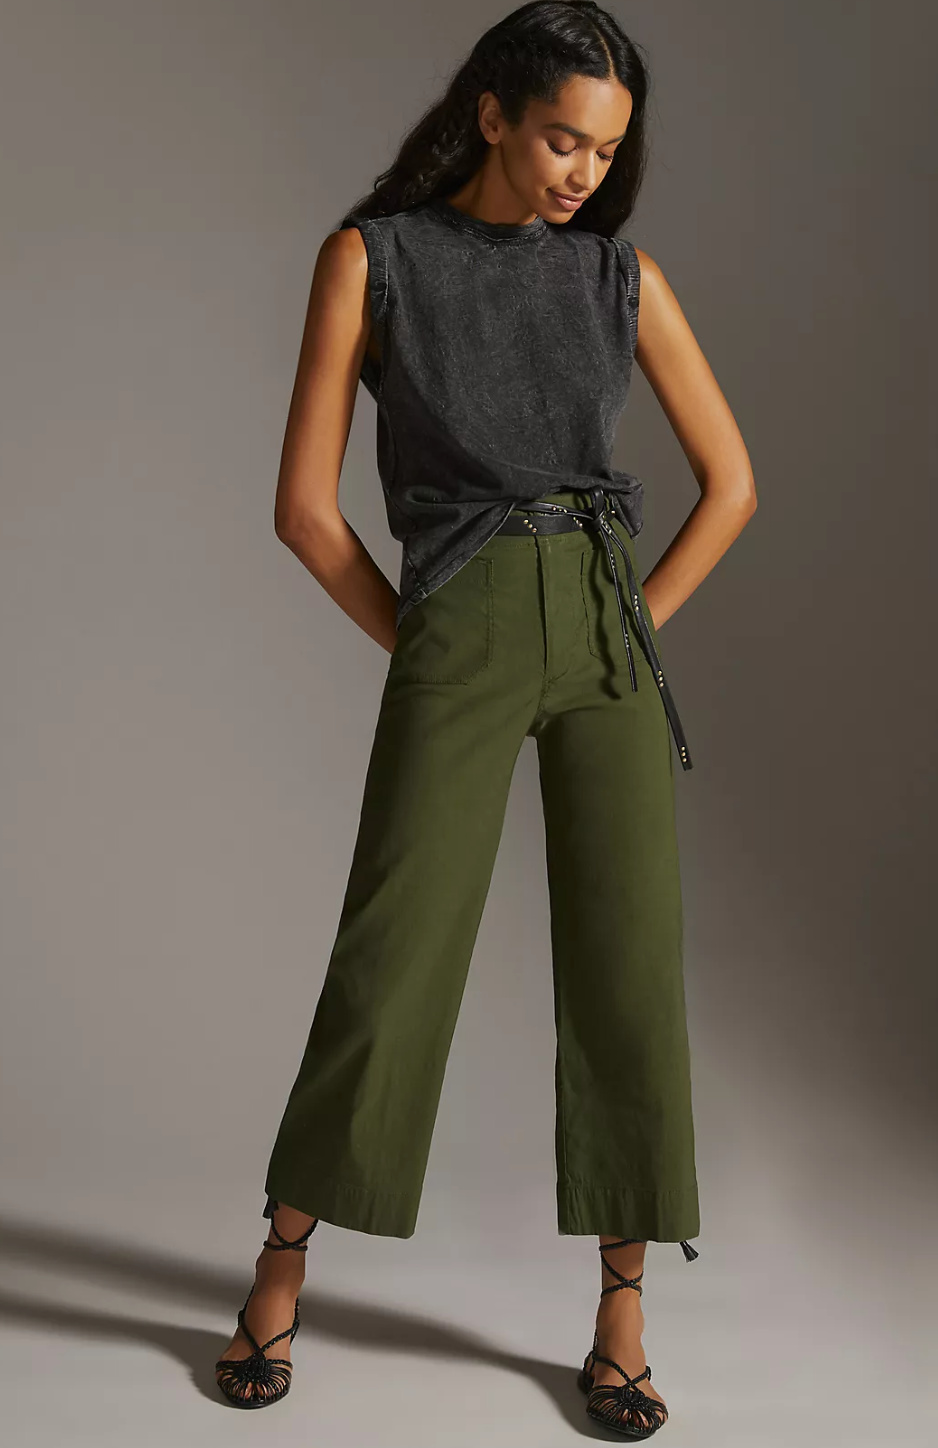 These Womens Cropped Pants Get Rave Reviews from Travelers